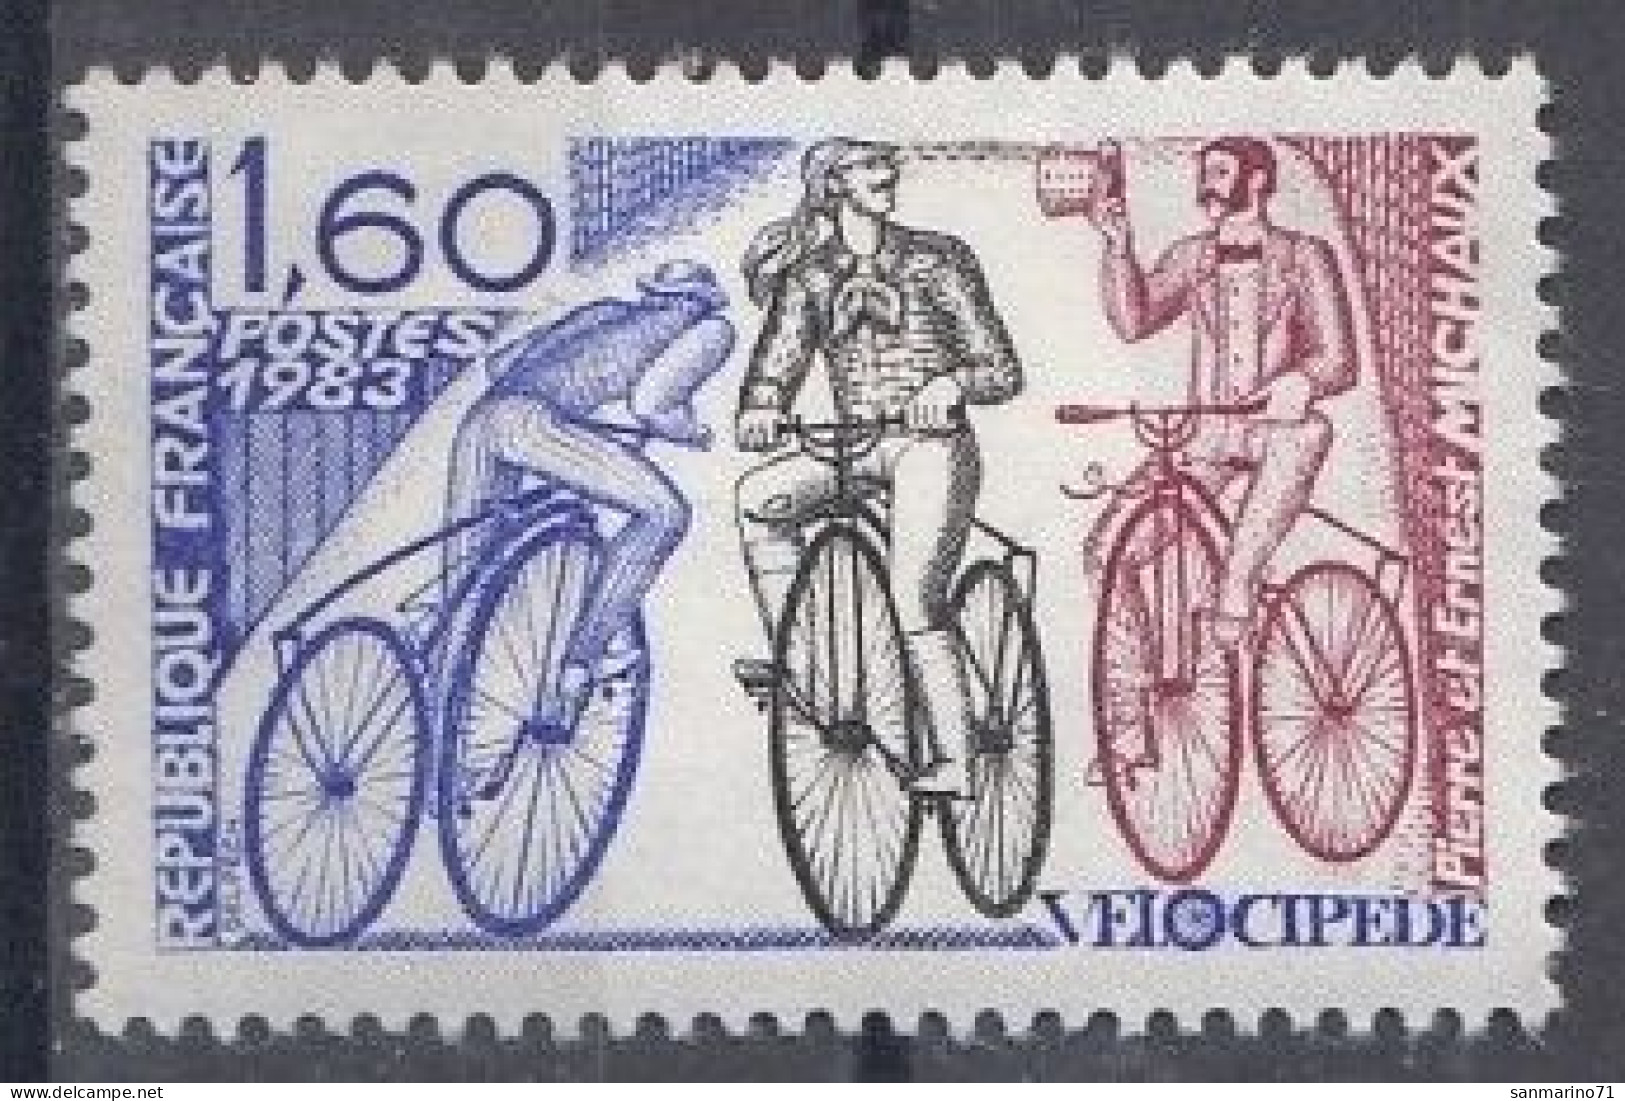 FRANCE 2413,unused - Cycling